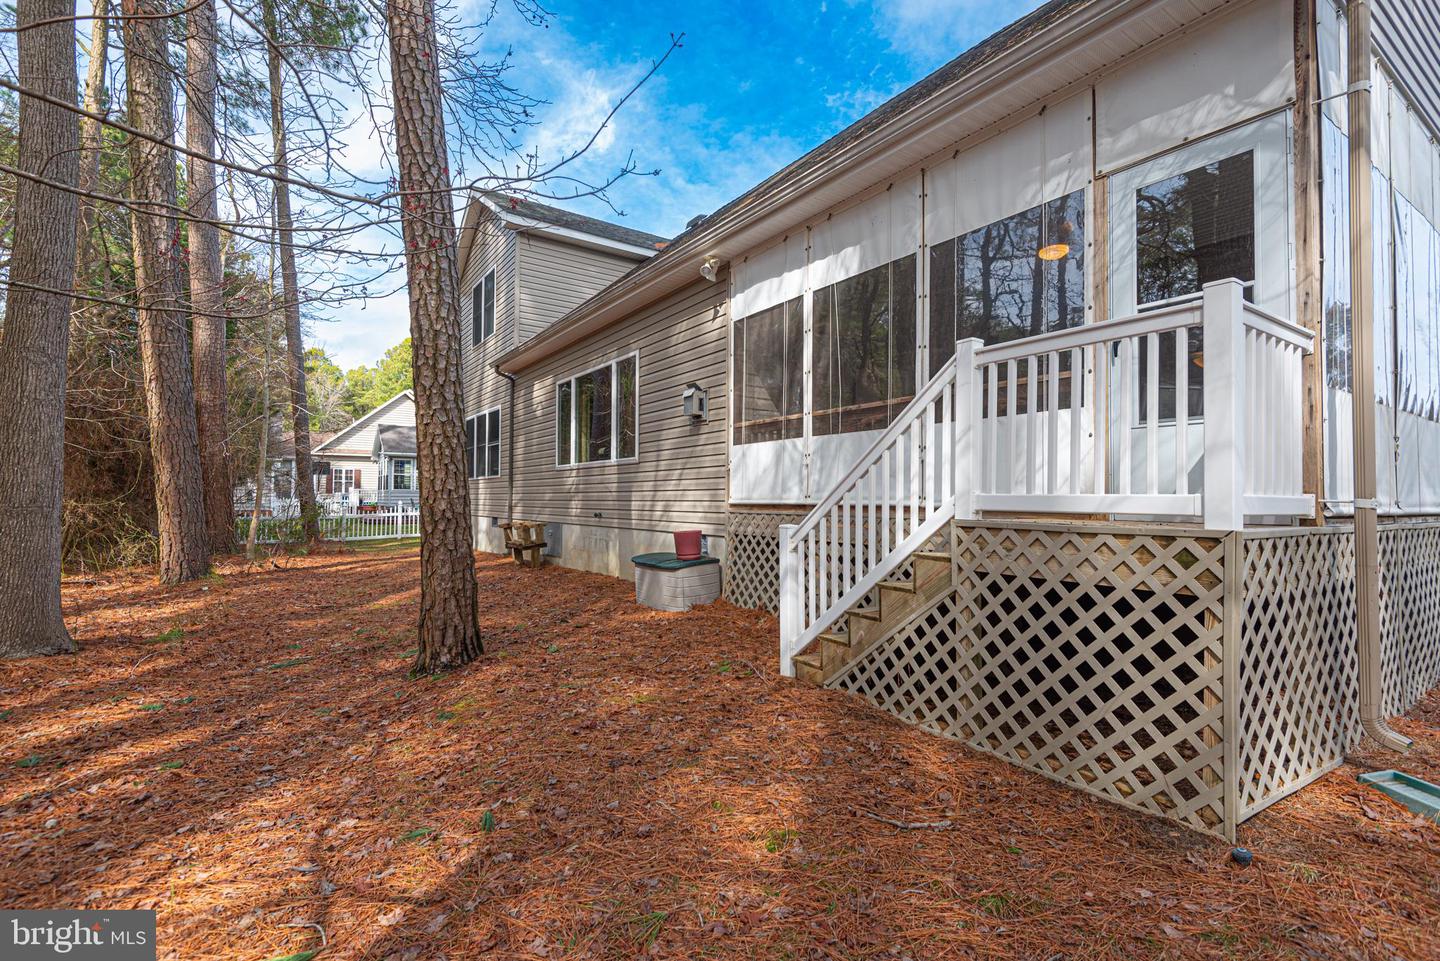 MDWO2019426-802904008020-2024-03-08-00-14-48 106 Pine Forest Dr | Berlin, MD Real Estate For Sale | MLS# Mdwo2019426  - 1st Choice Properties